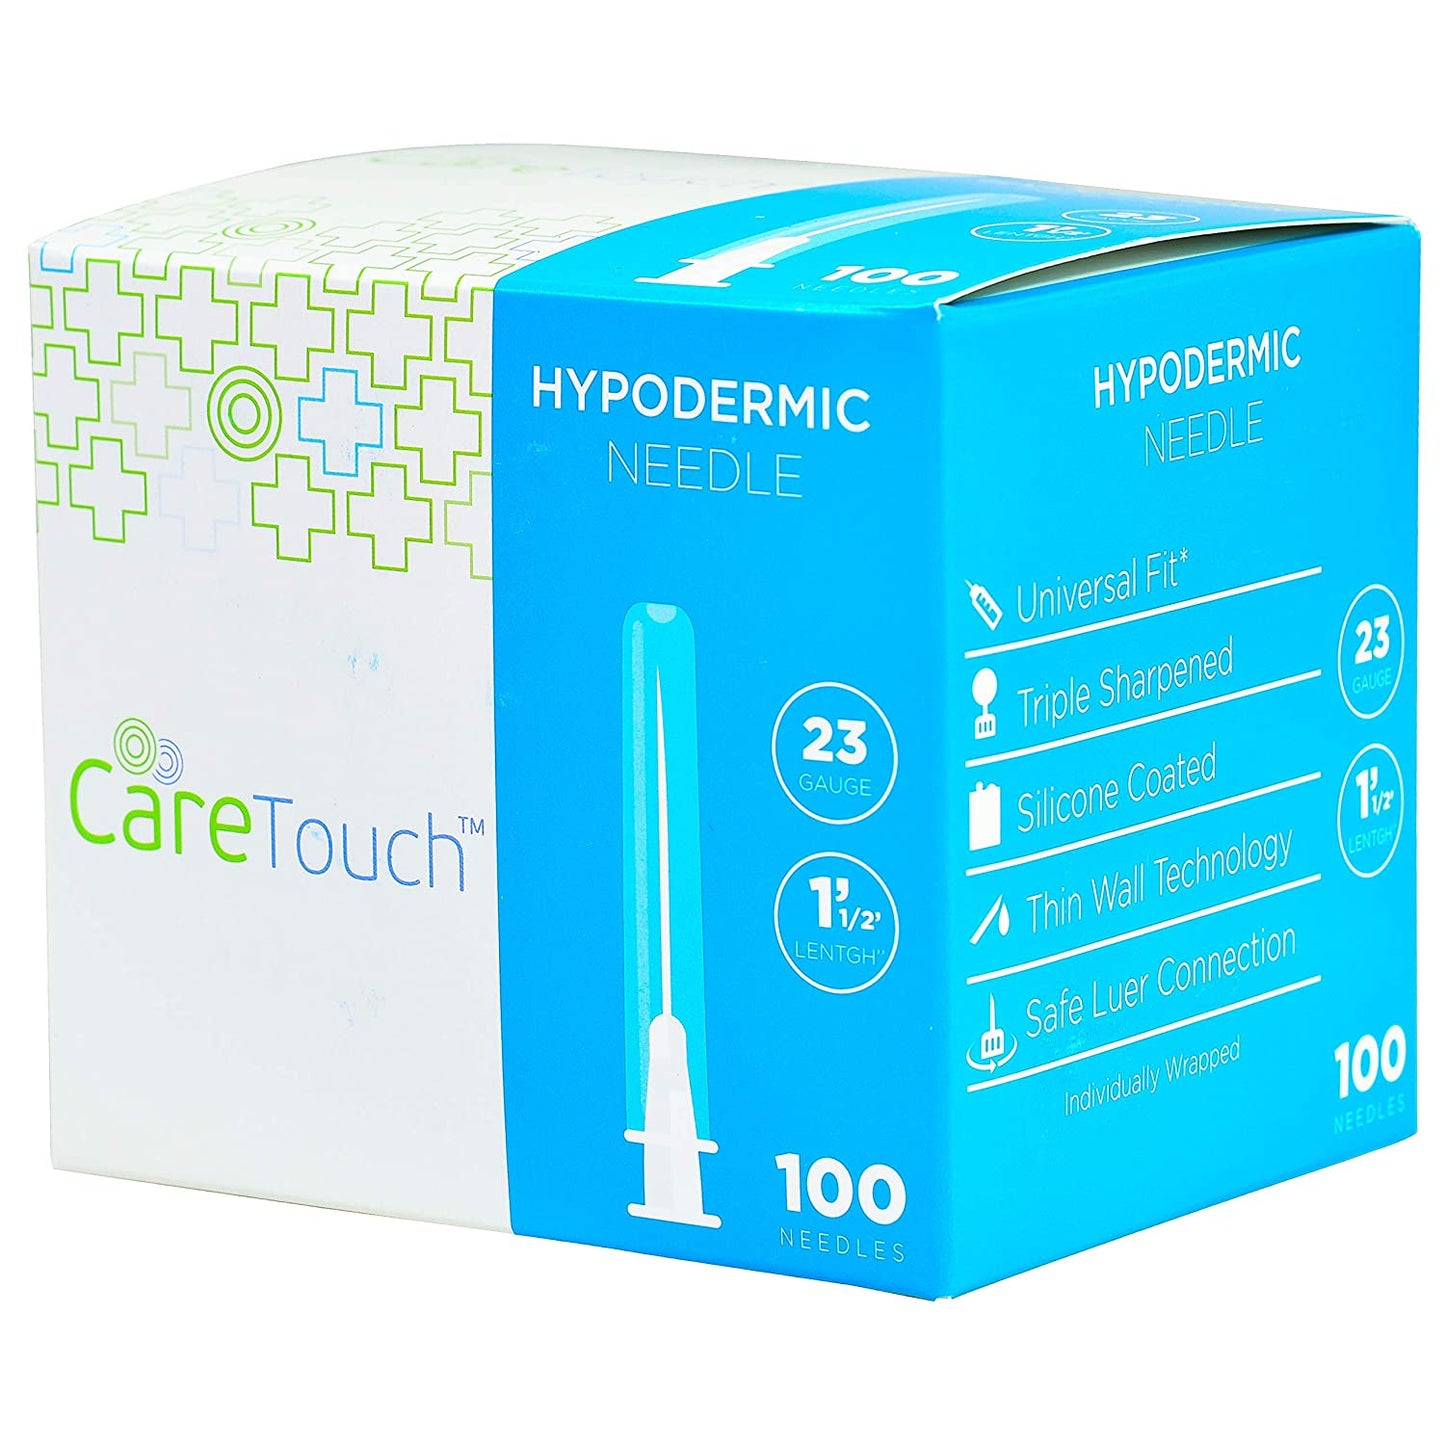 Care Touch Hypodermic Needle, 23GX1.1/2 (Case of 10 units)